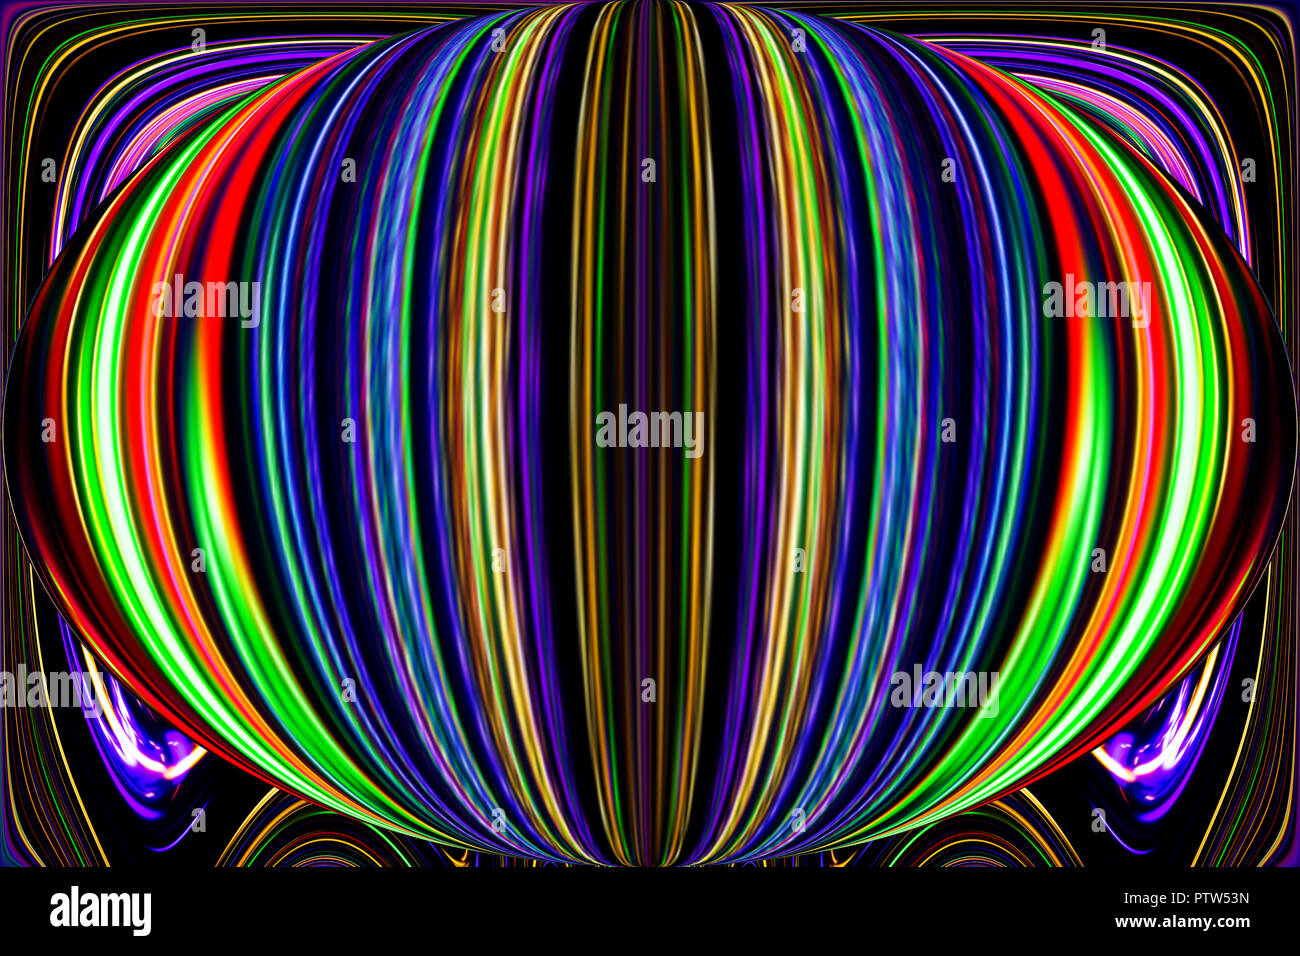 Color lines and curves creates fantastic elipse image. Abstract painting - psychedelic pictures. Stock Photo